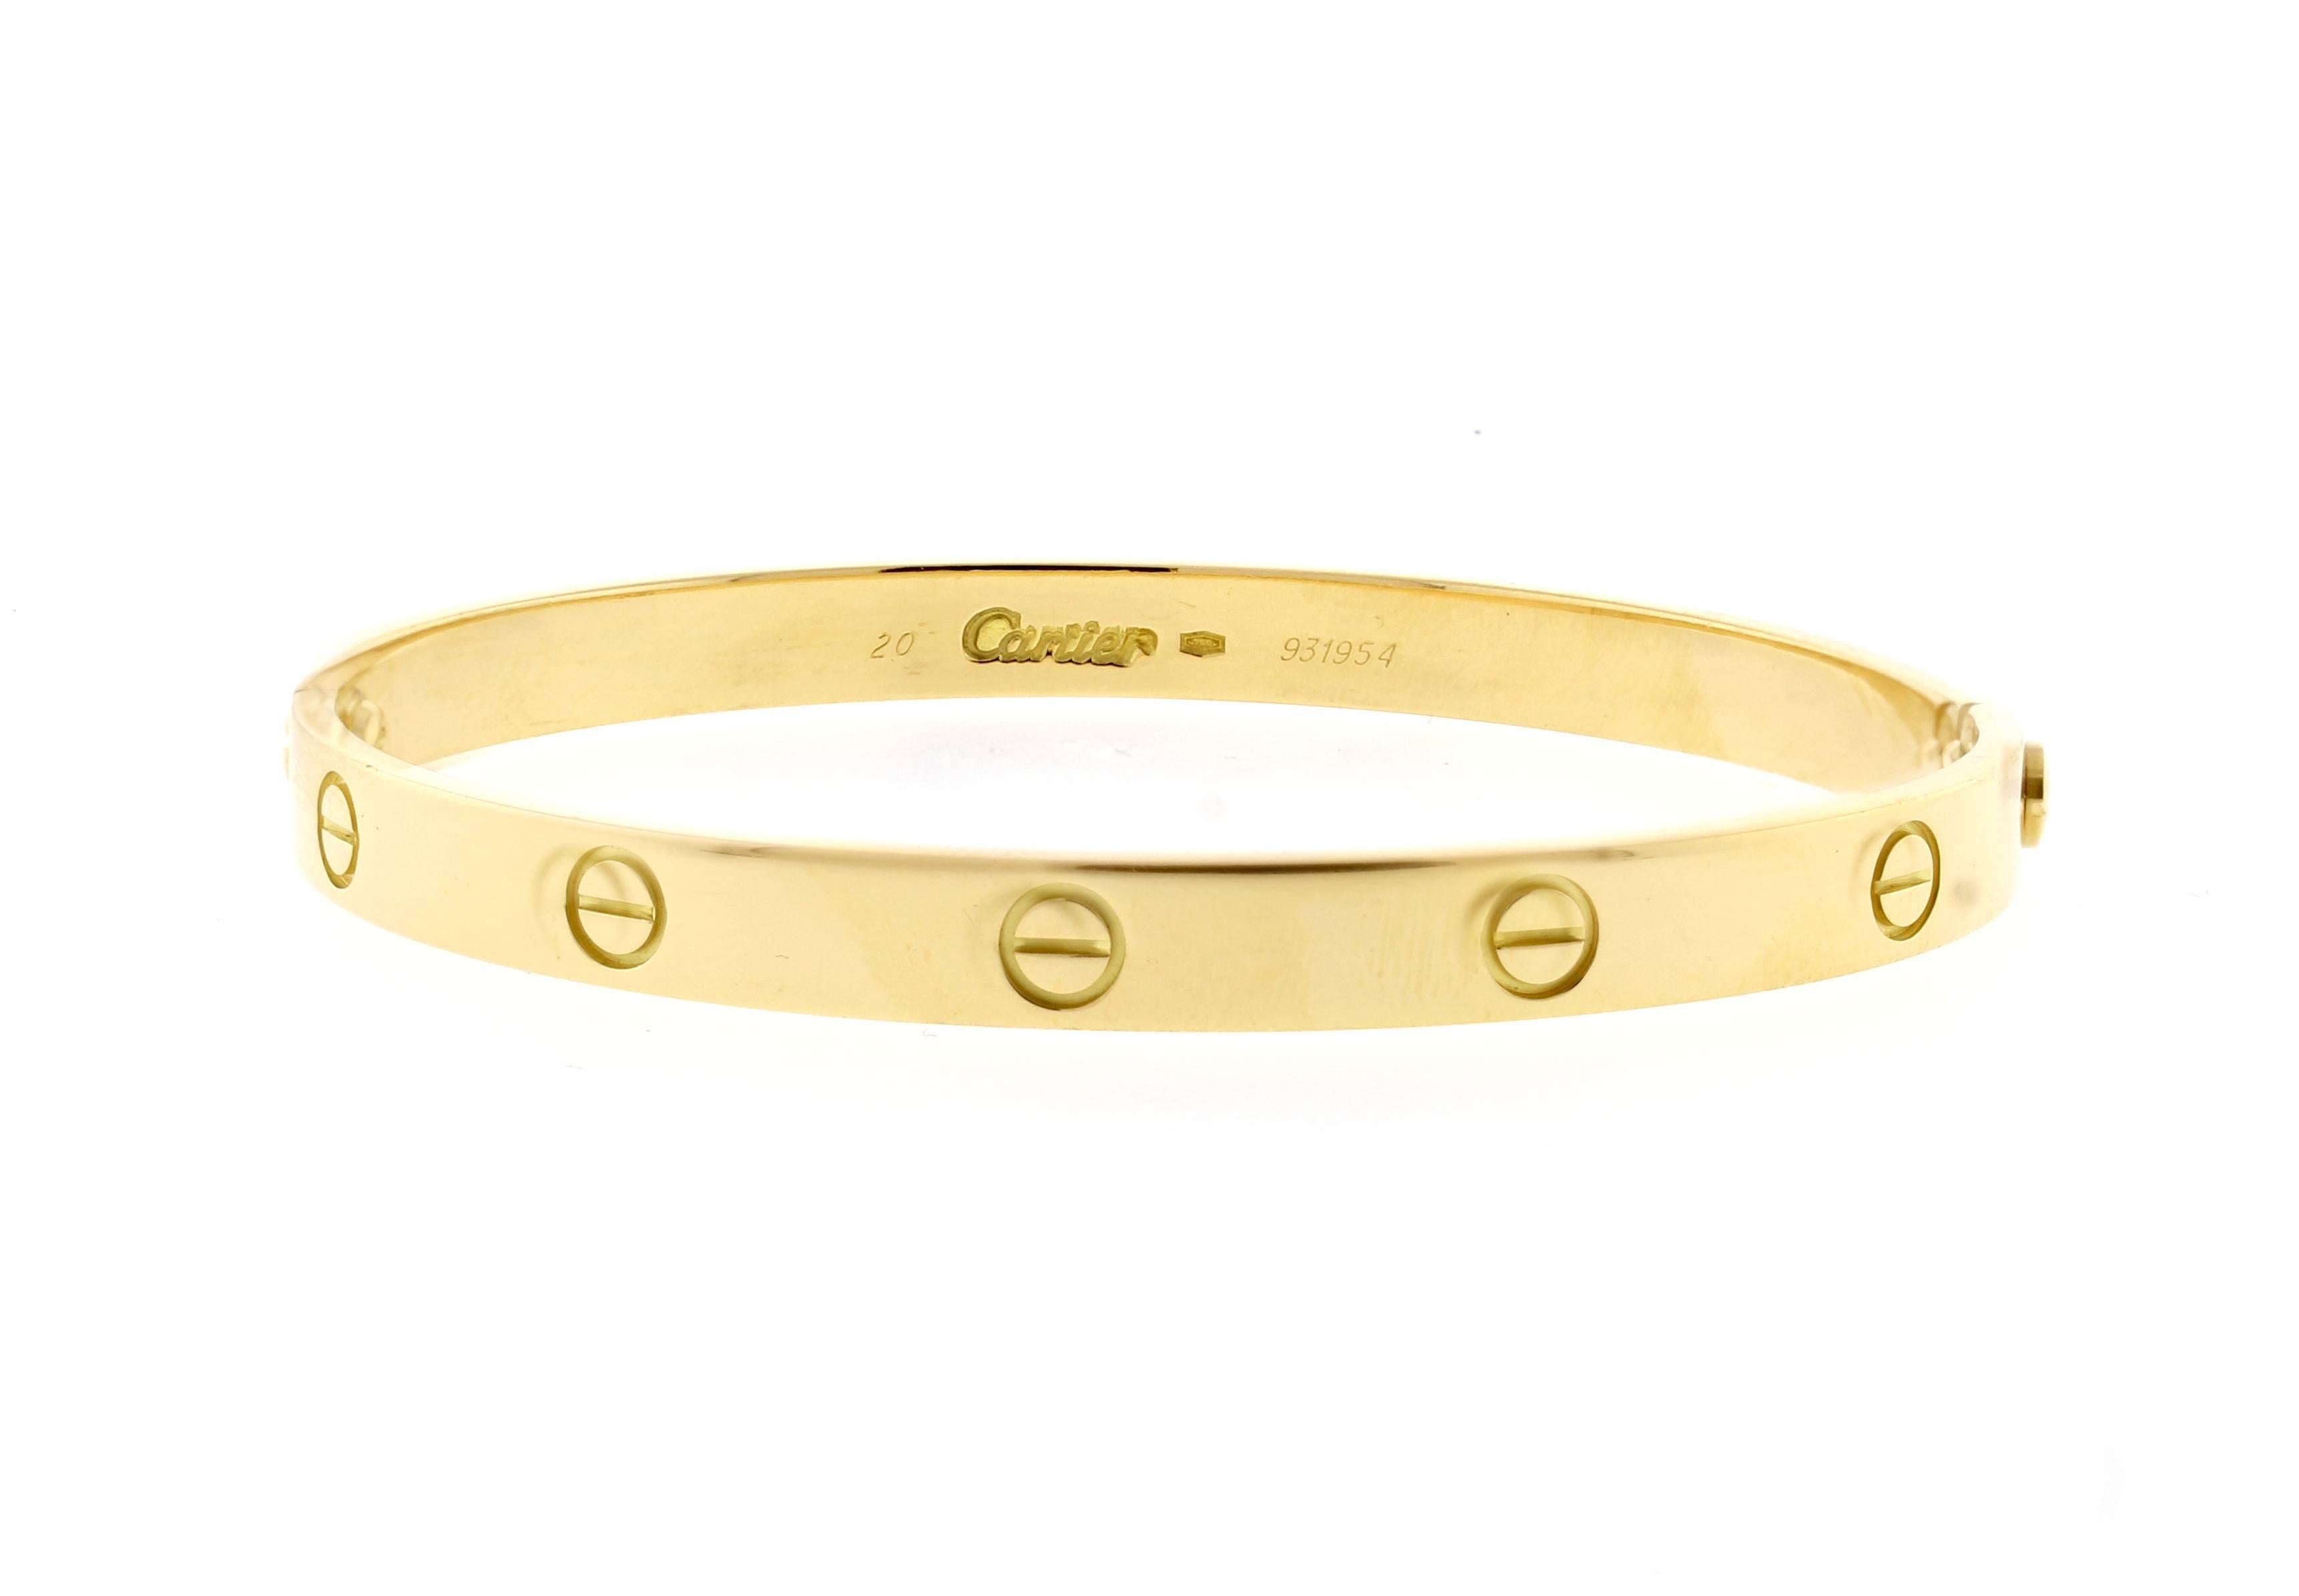 18 karat yellow gold Cartier Love bracelet. The love bracelet remains an iconic symbol of love that transcends convention. Original design, type 1, Size 20,  screwdriver, Cartier box.  
Certificate of Authenticity, sales receipt, Polished to like